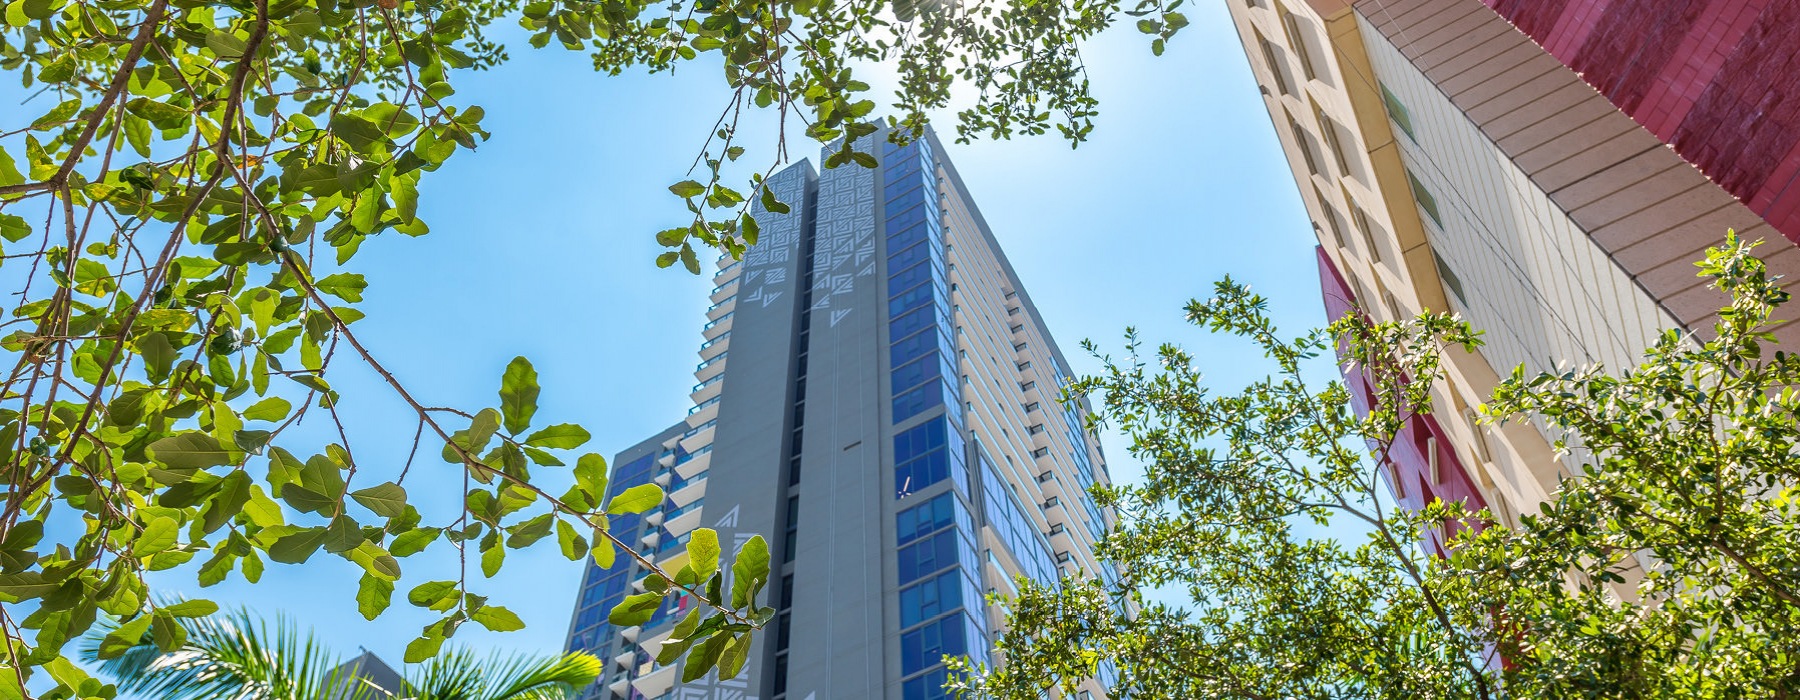 upward view of Alea Miami high rise framed by leaves on tree branches